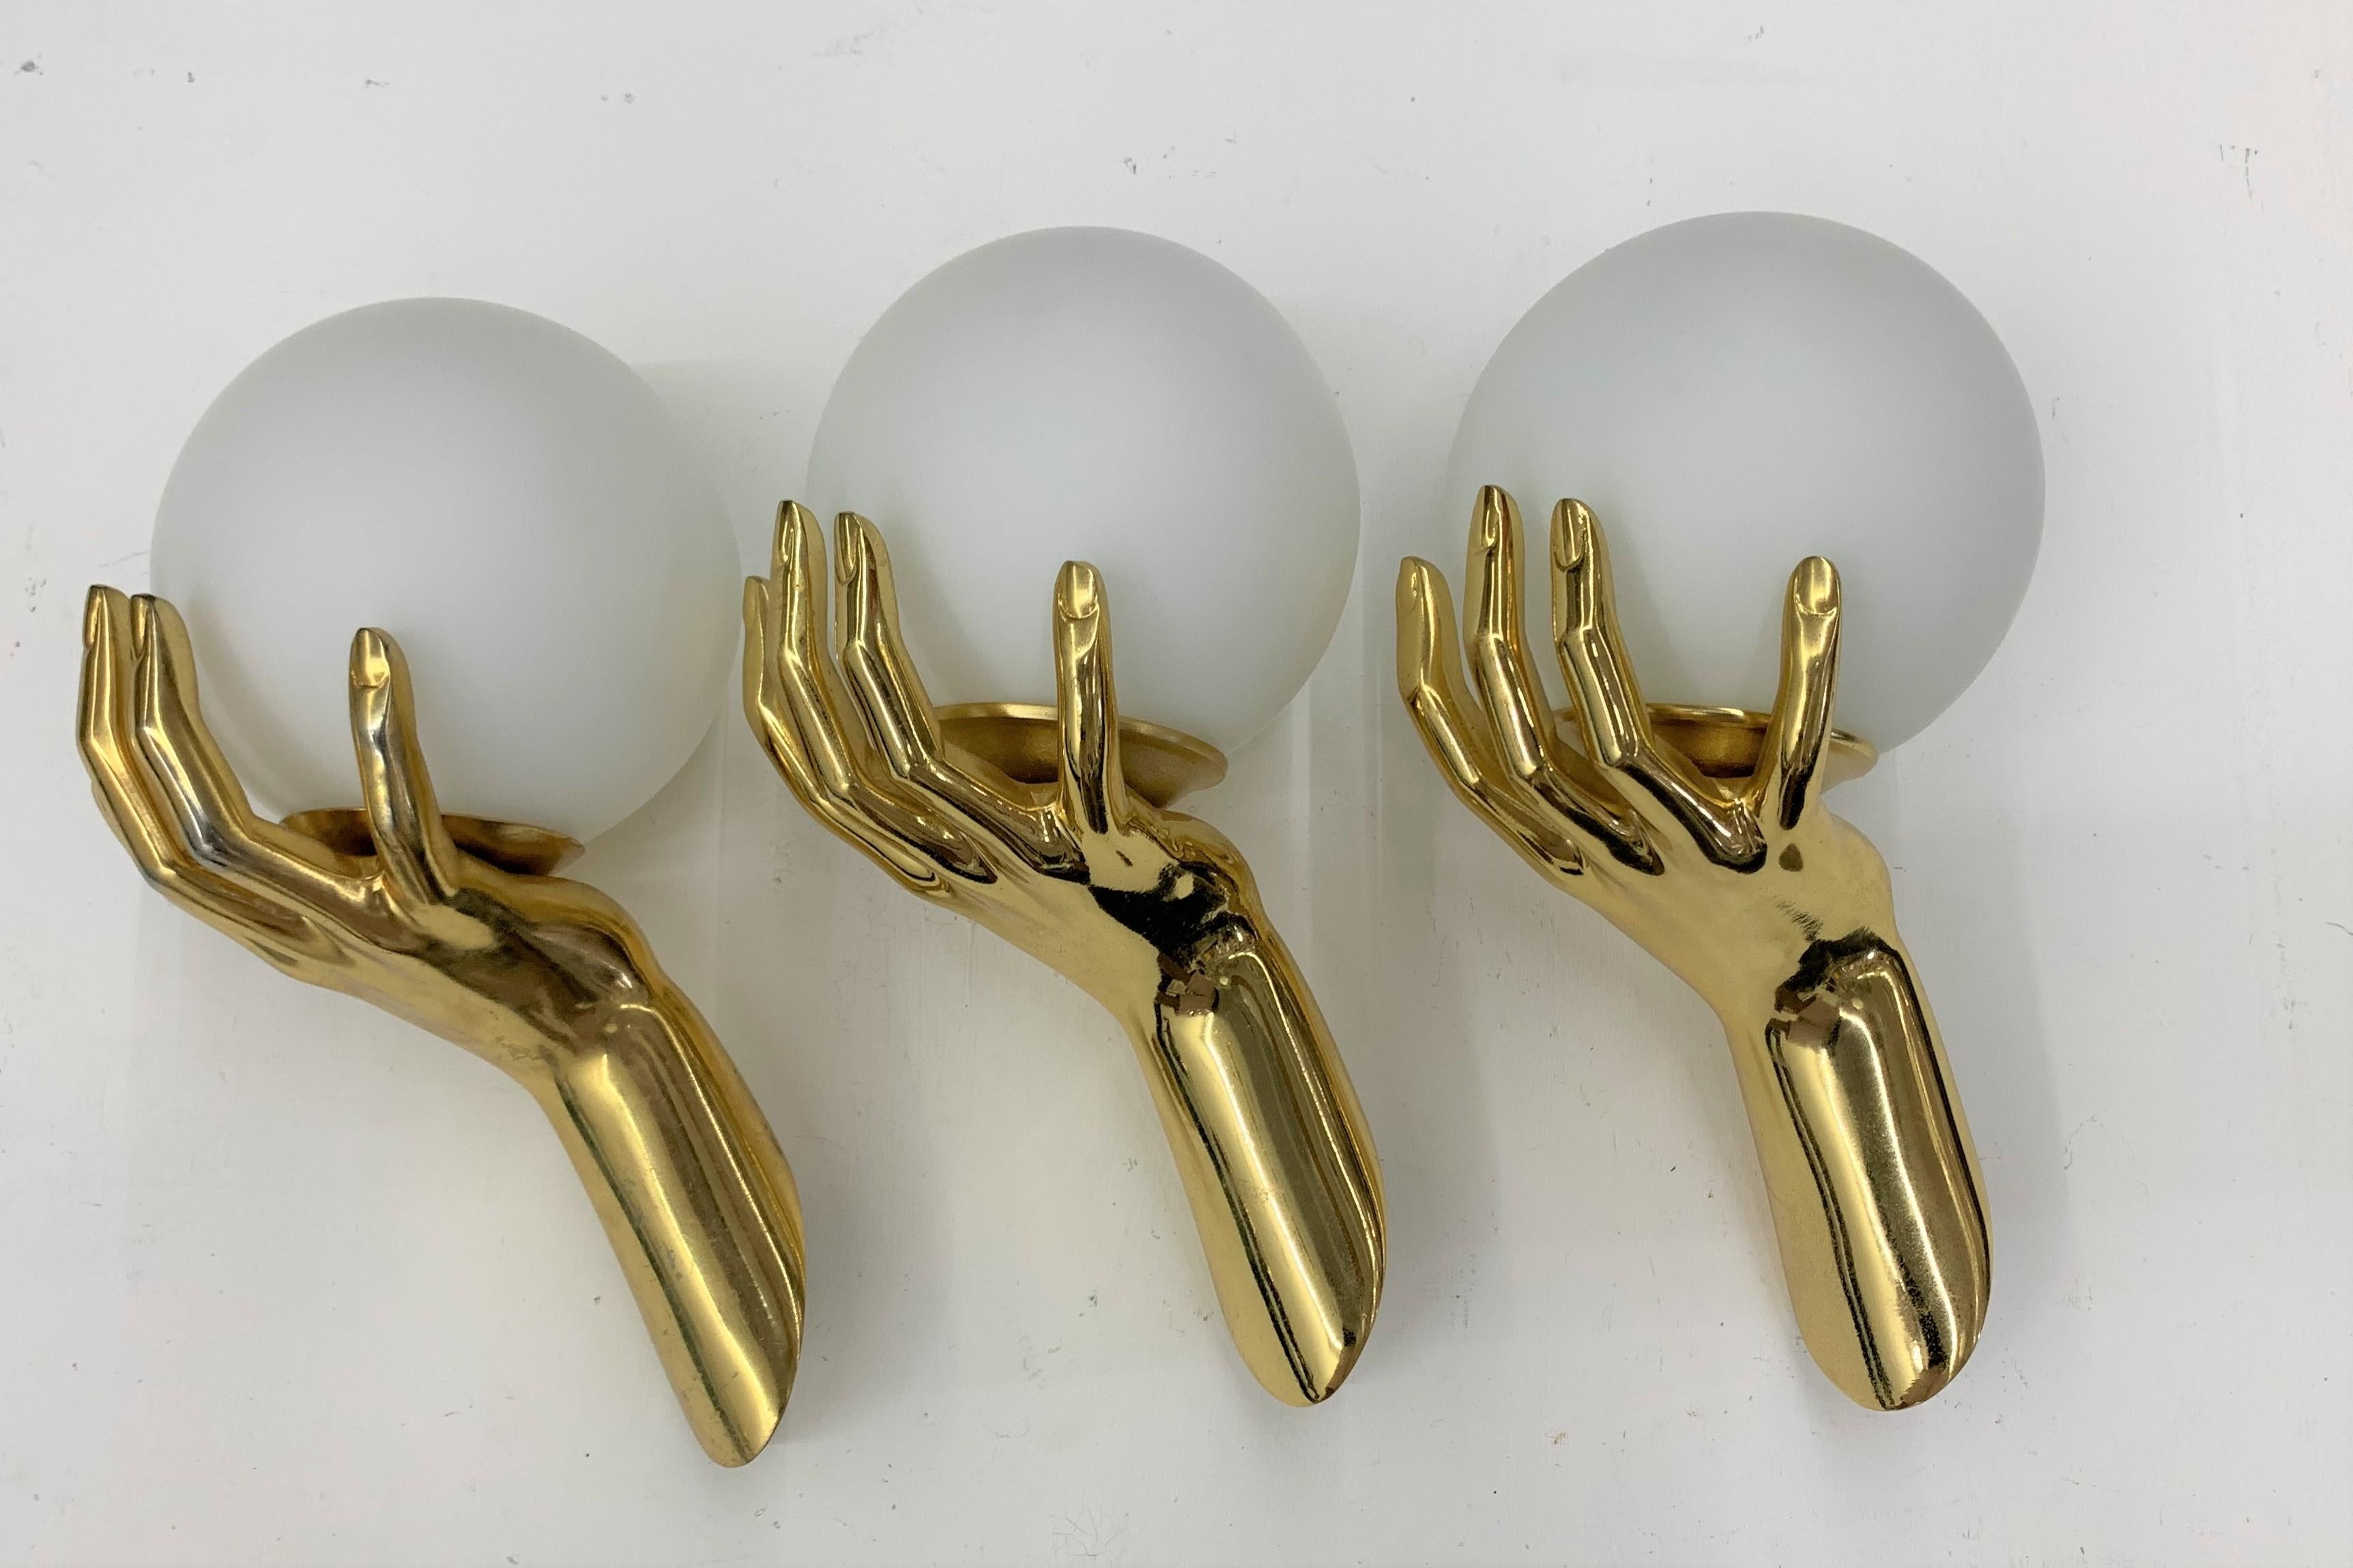 Gorgeous sconces or wall lights produced by Maison Arlus in gilt bronze.
Made in France, circa 1950s
There are 3 available.